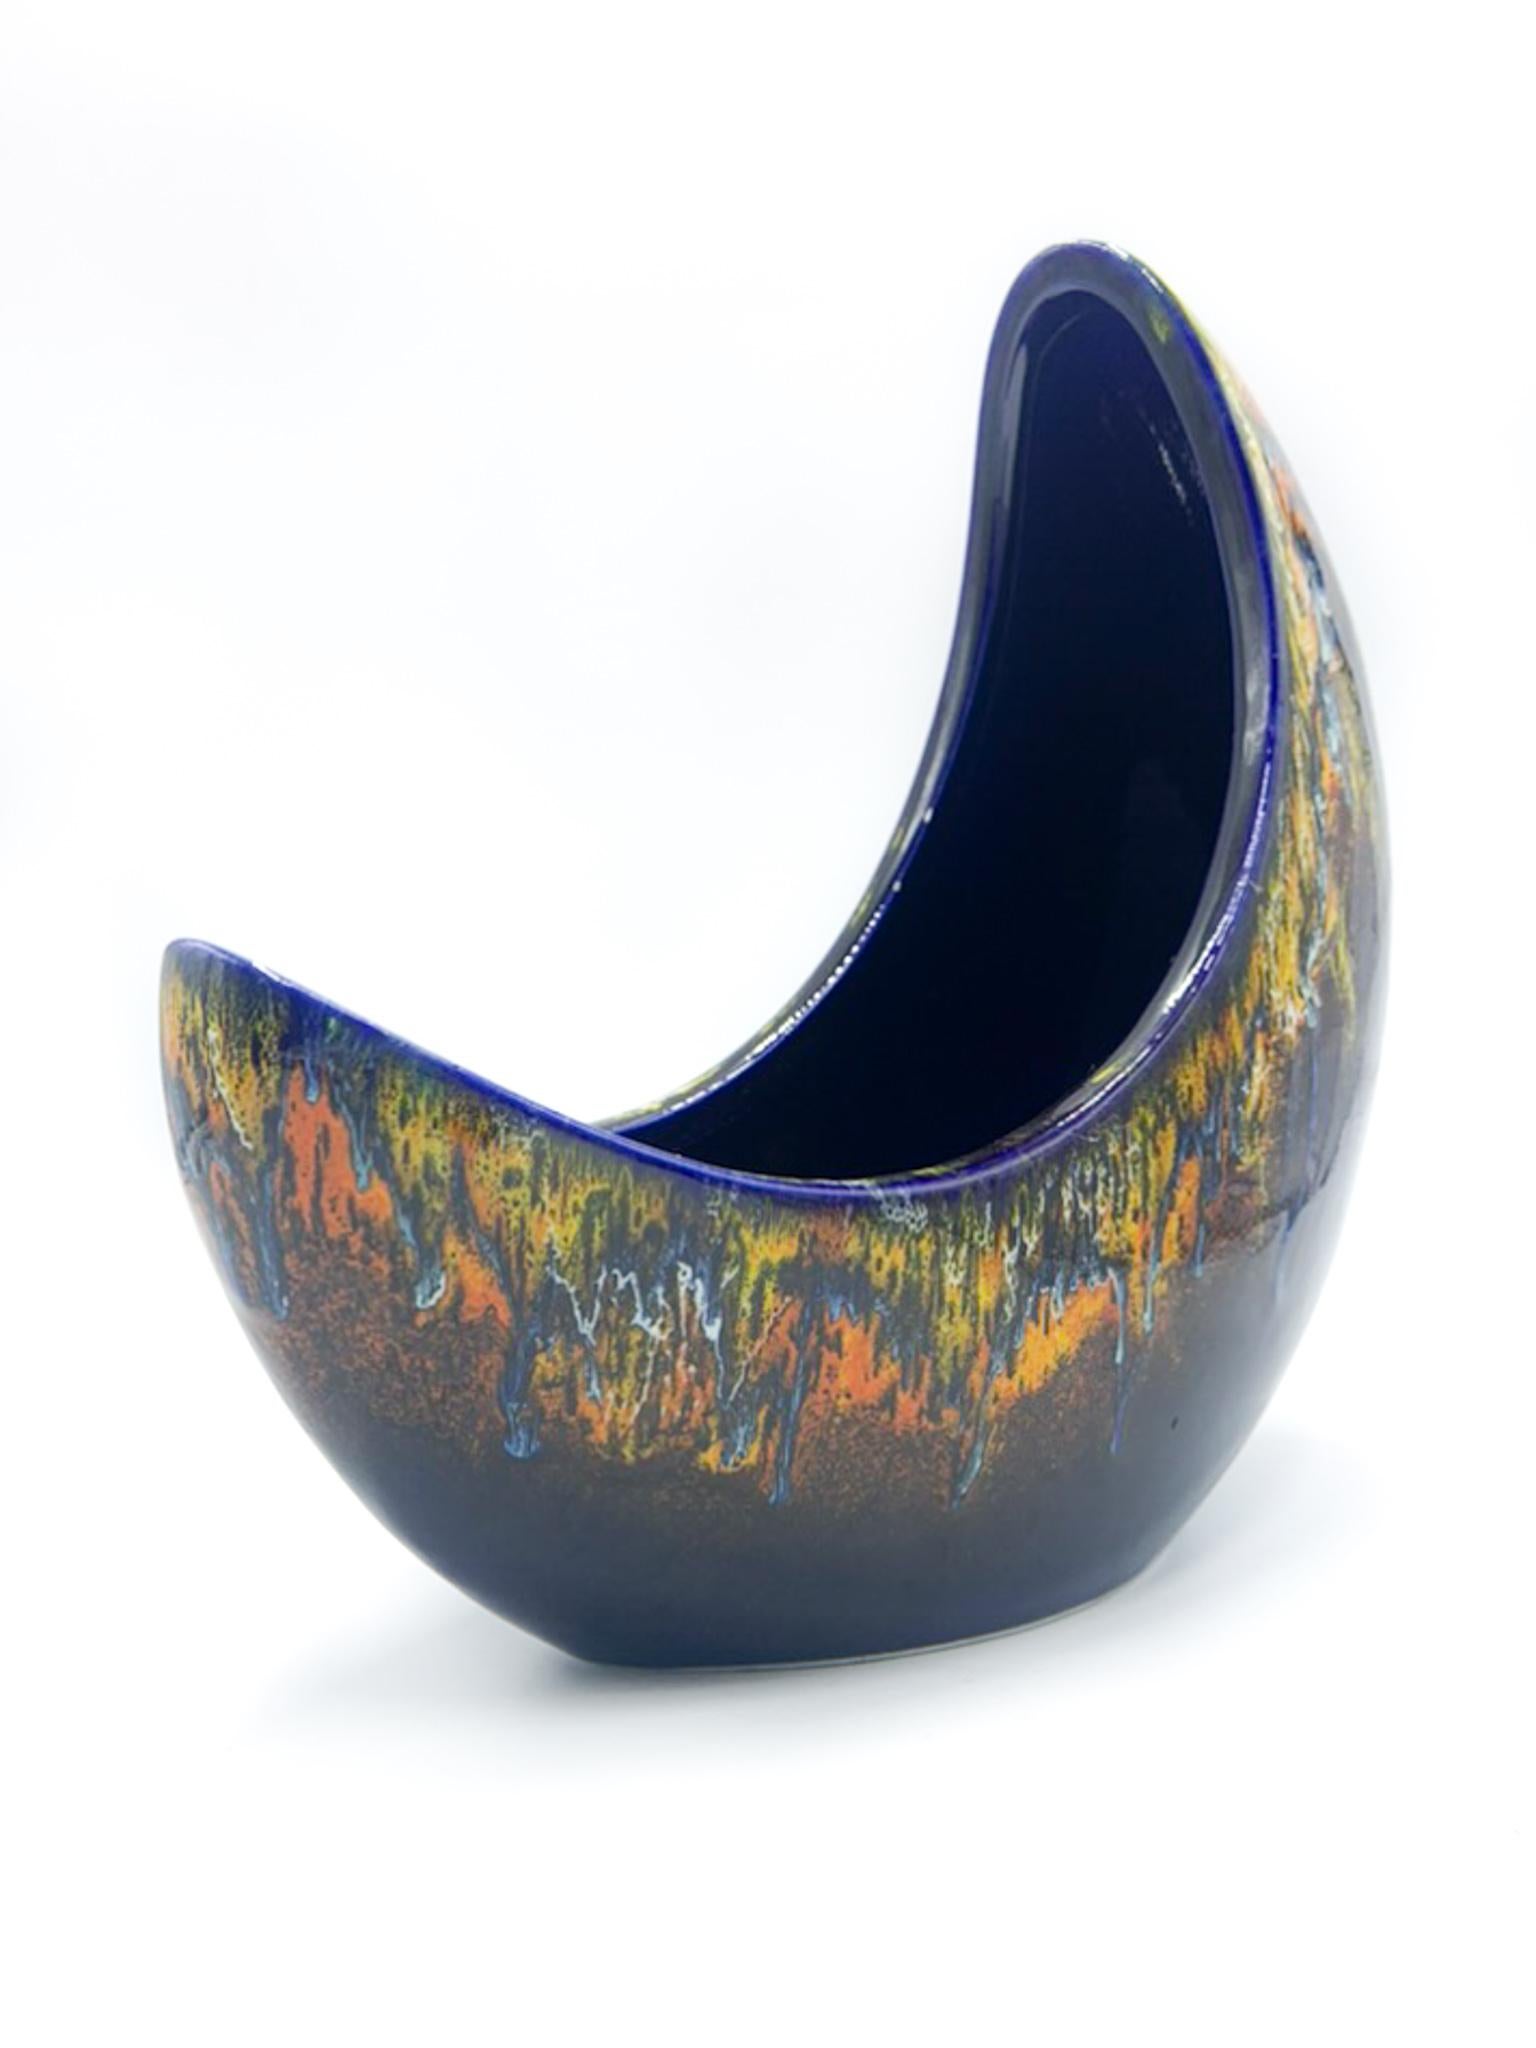 Hand-painted moon-shaped vase, made by Roberto Rigon for Bertoncello Ceramiche in the 1960s.

The vase in handpainted, designed by Roberto Rigon for Bertoncello. 

Excellent conditions.